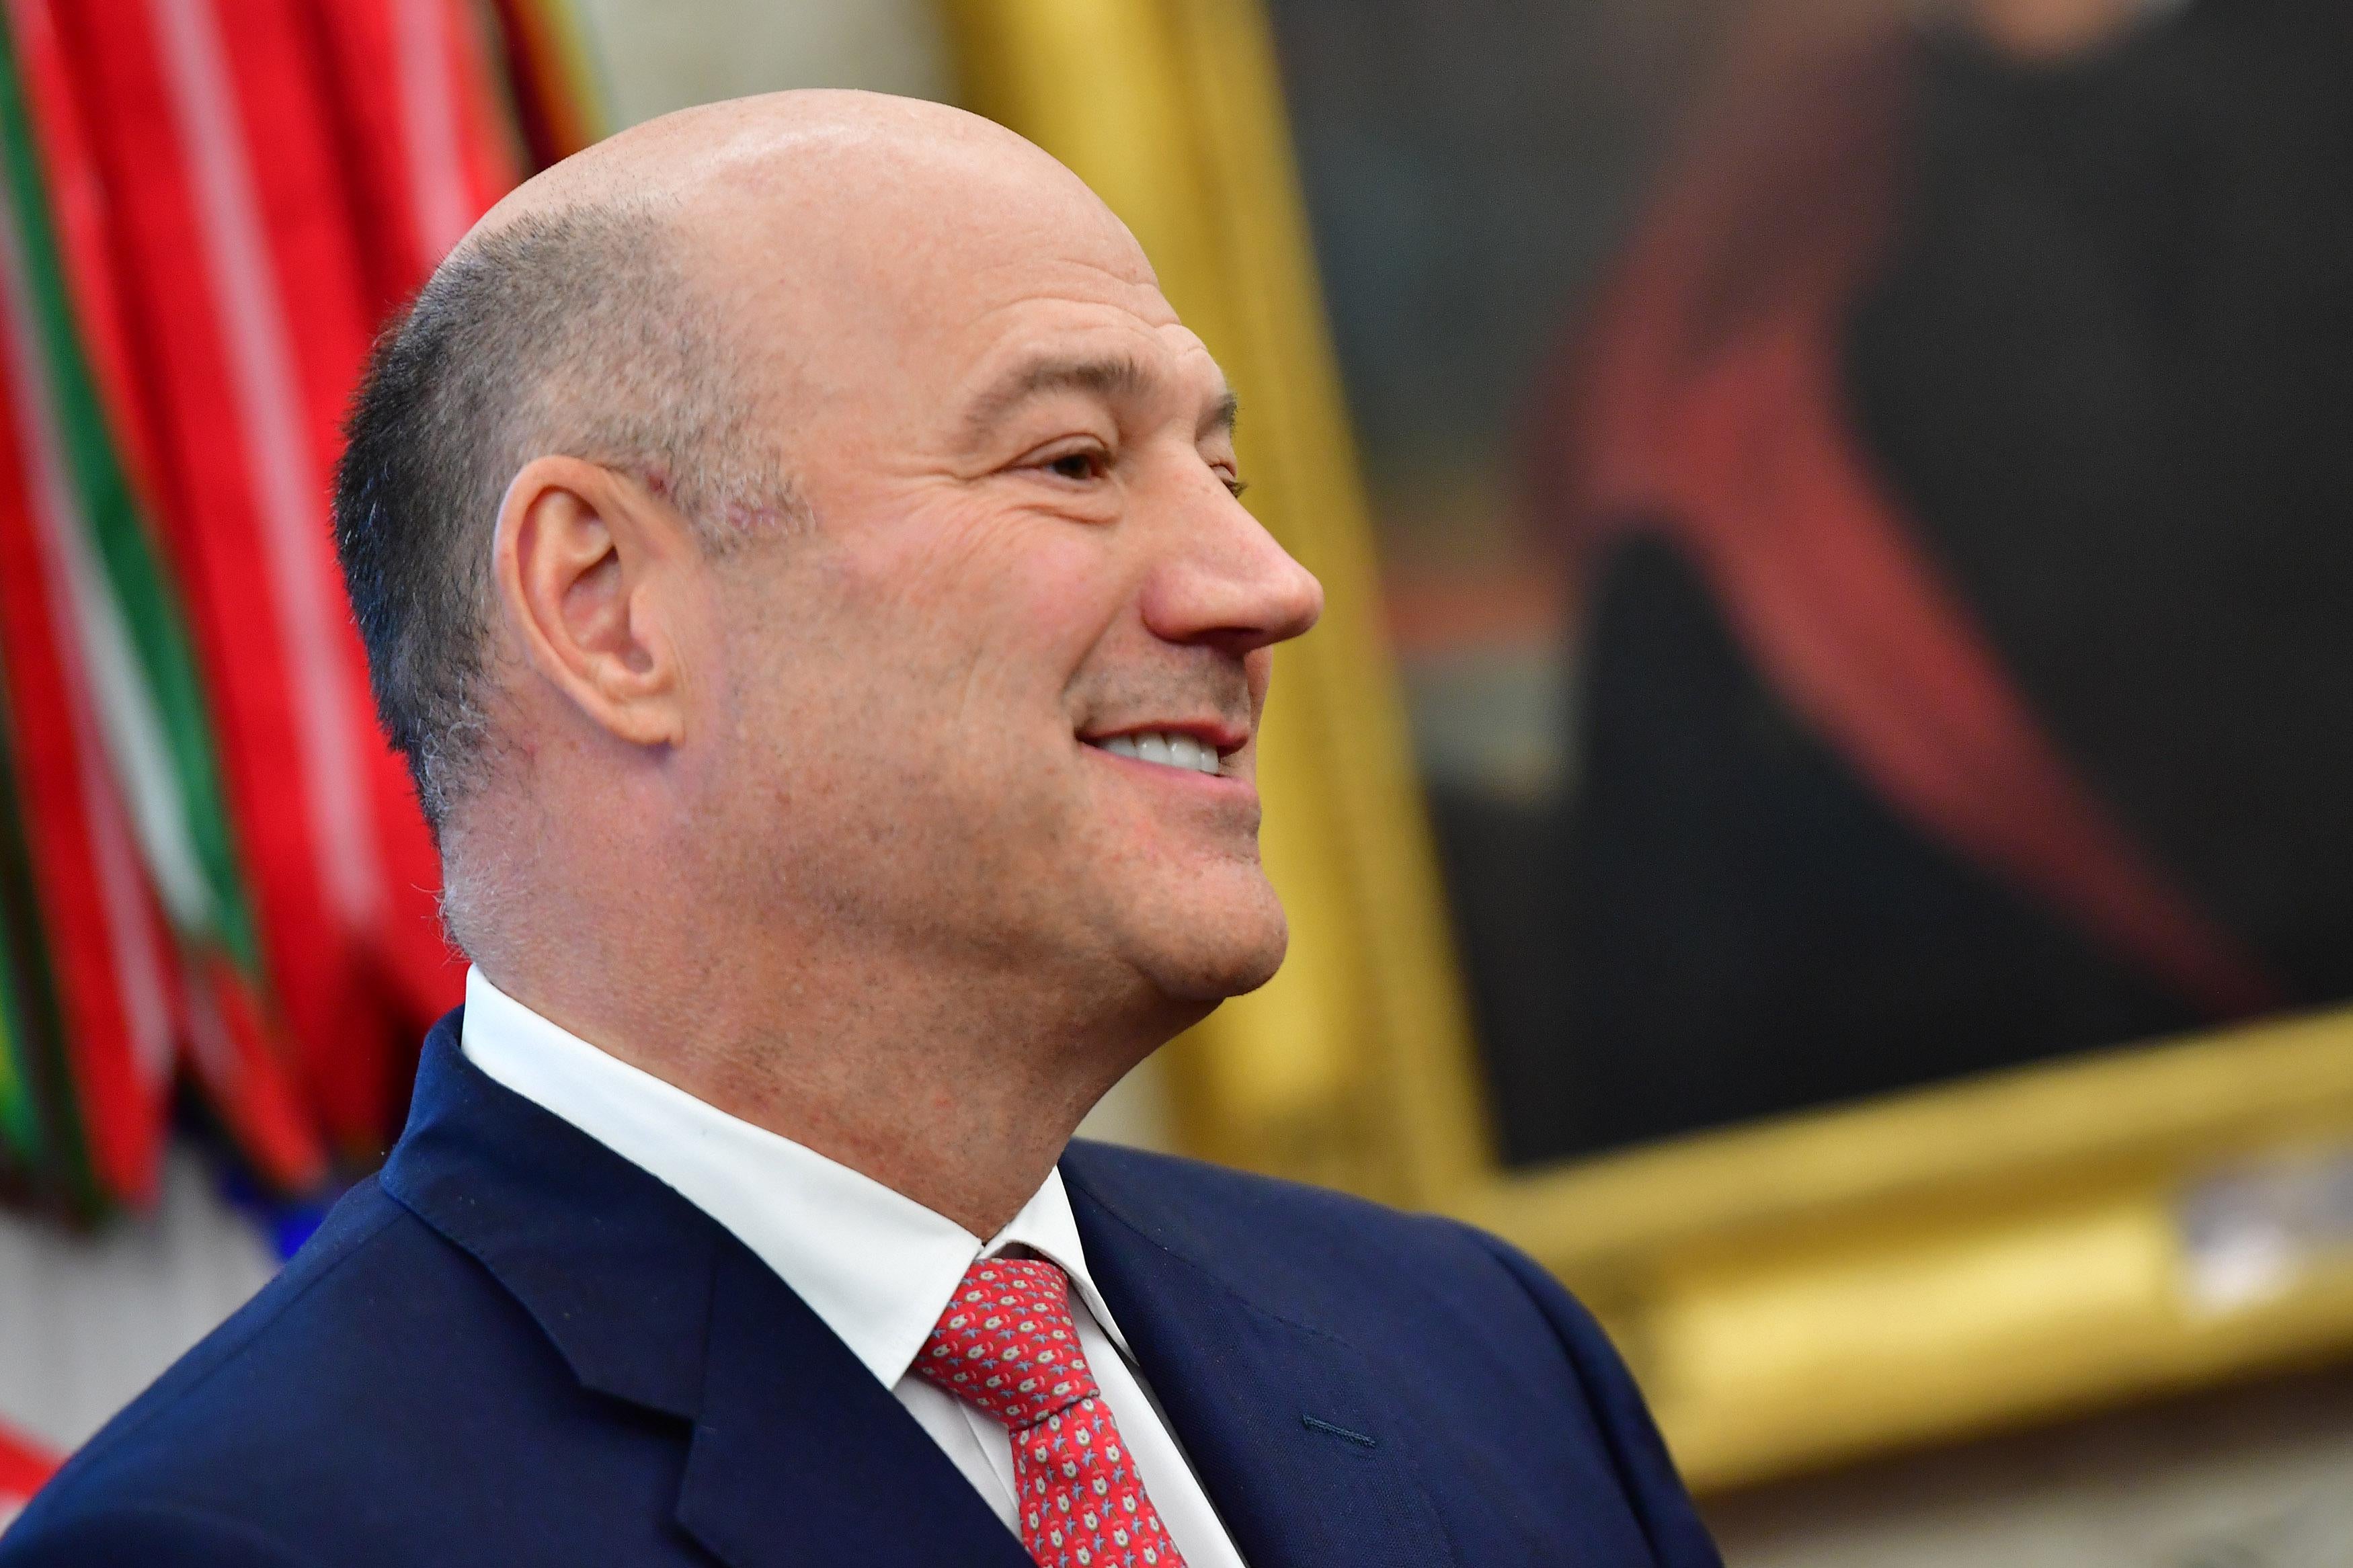 White House chief economic adviser Gary Cohn in the Oval Office.